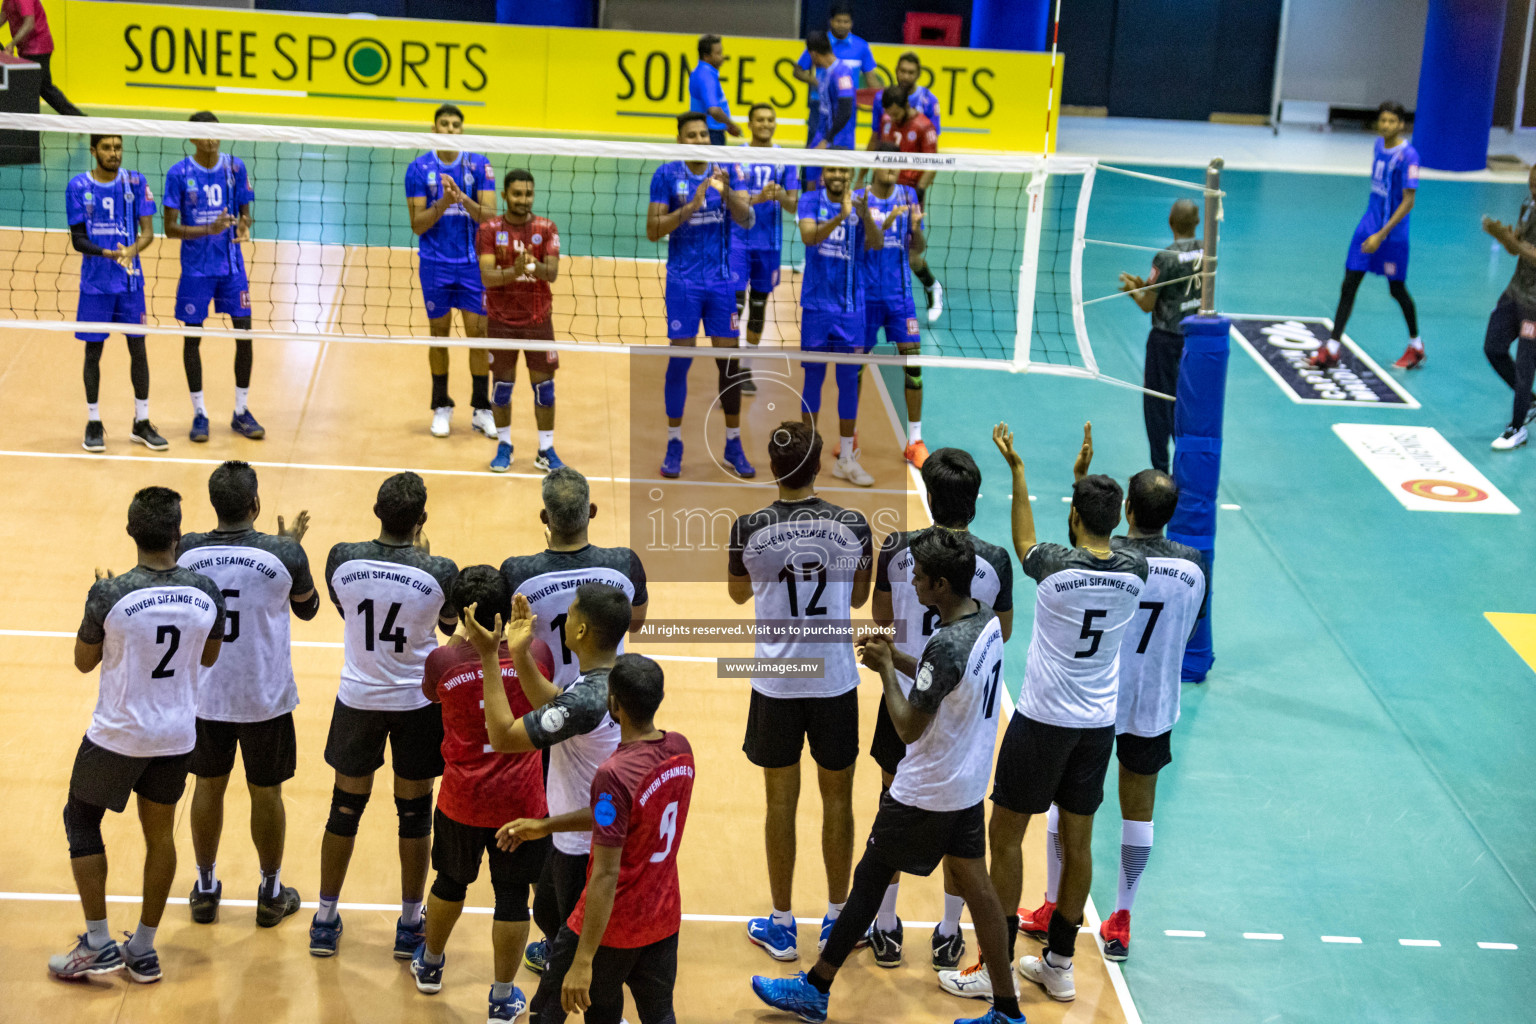 Dhivehi Sifainge Club vs Police Club in the Men's Division of Milo National Volleyball League 2022 held on 02 July 2022 in Social Center, Male', Maldives